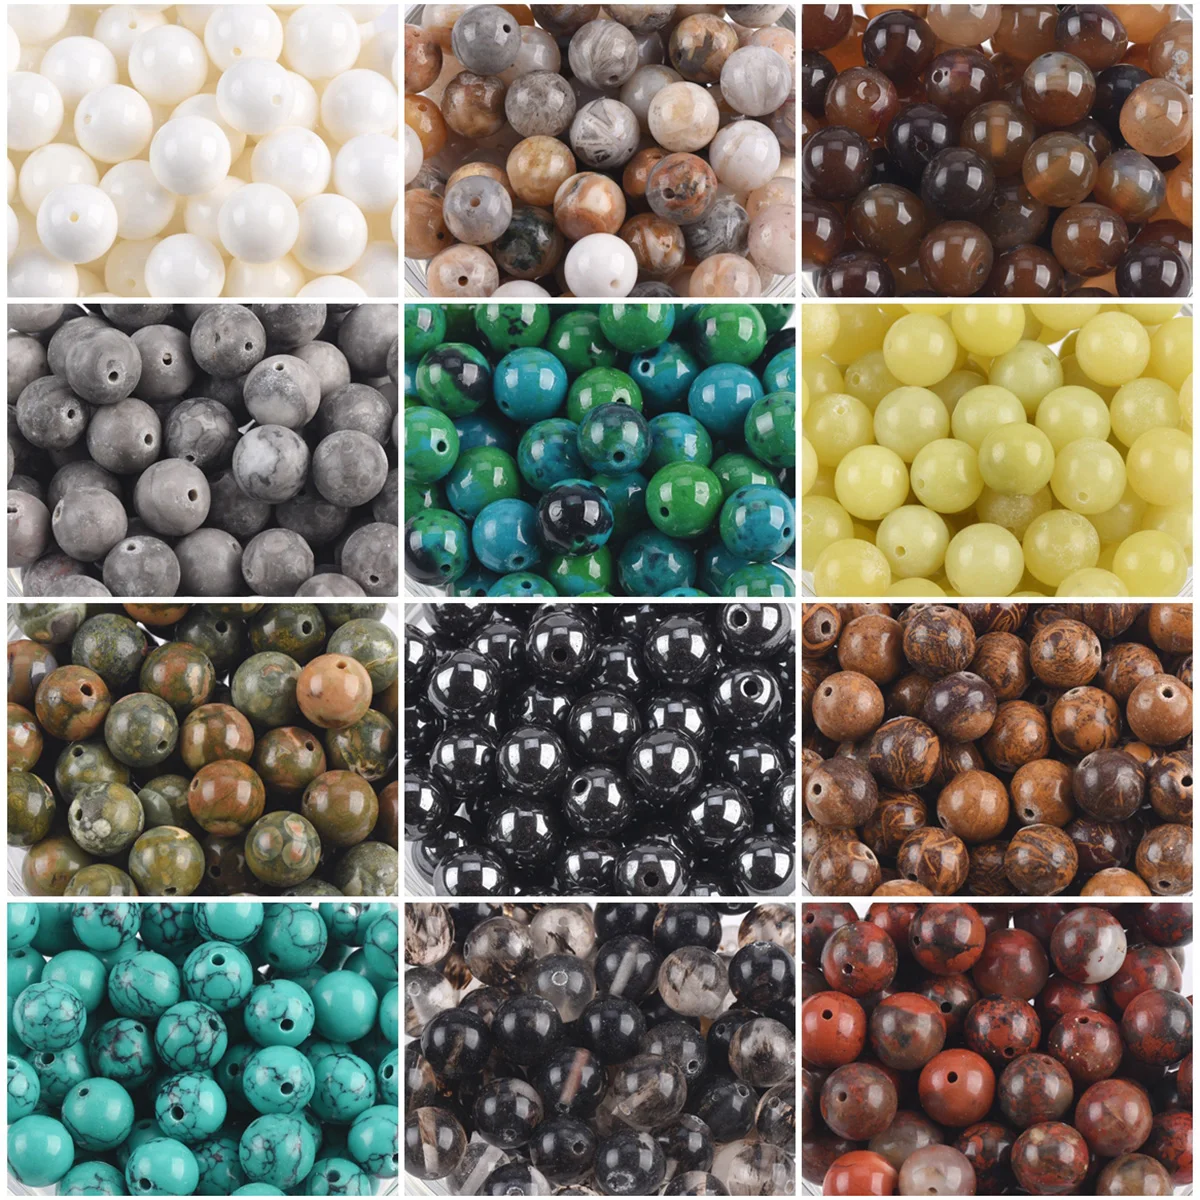 Round 4mm 6mm 8mm 10mm 12mm Natural Stone Rocks Loose Spacer Beads lot for DIY Bracelet Jewelry Making Crafts Findings painted stone stones painting good looking for crafts coloring rocks fish aquarium kit